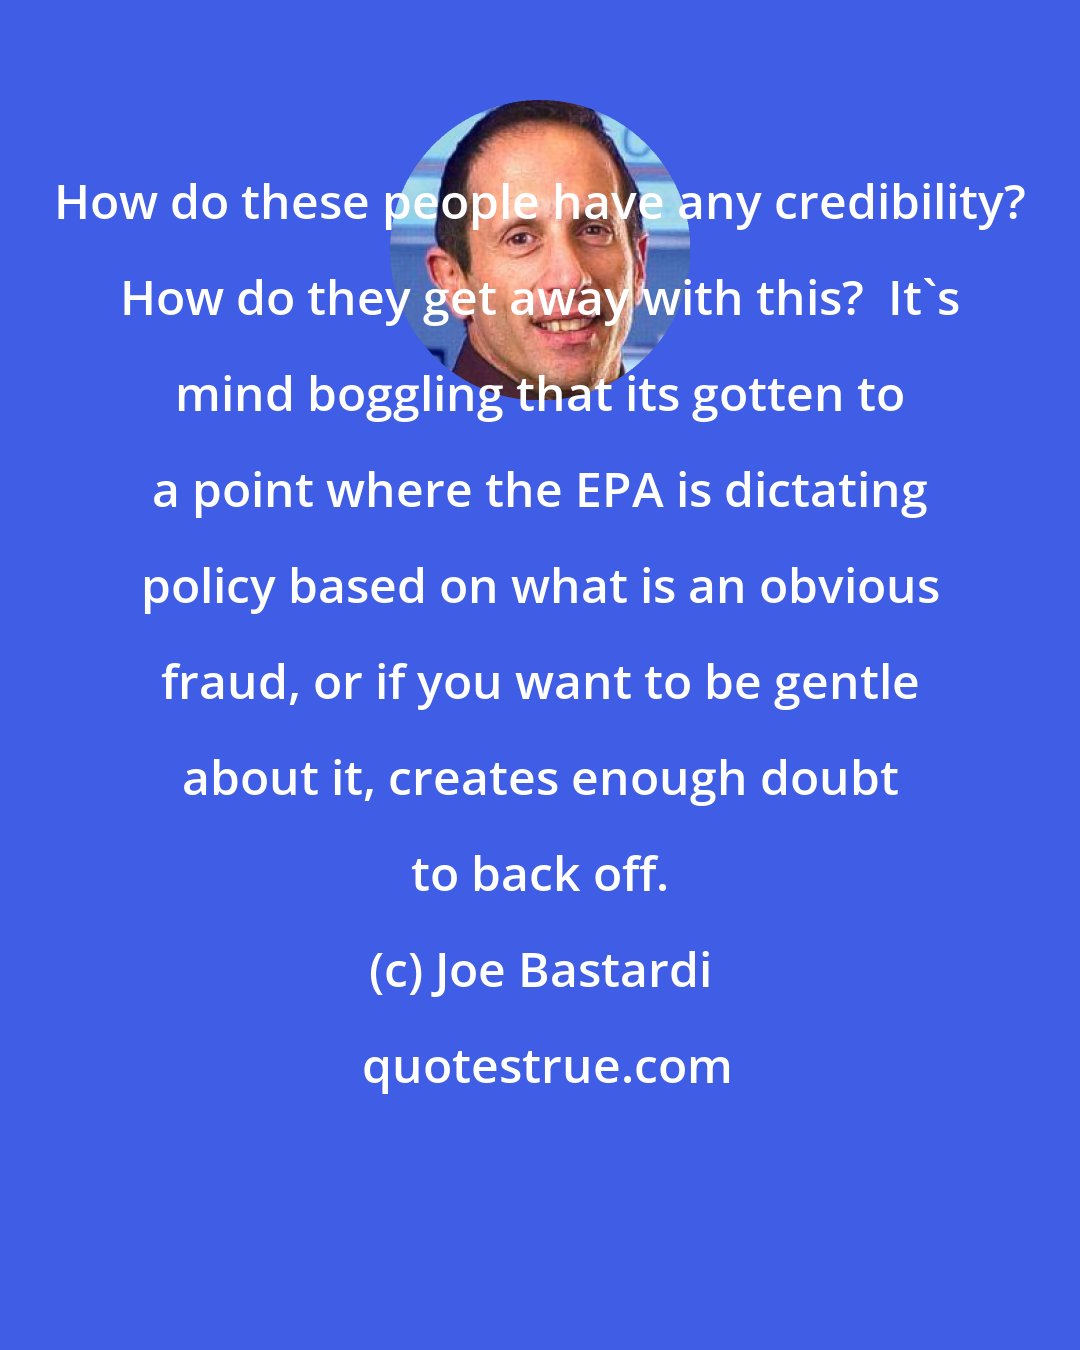 Joe Bastardi: How do these people have any credibility? How do they get away with this?  It's mind boggling that its gotten to a point where the EPA is dictating policy based on what is an obvious fraud, or if you want to be gentle about it, creates enough doubt to back off.